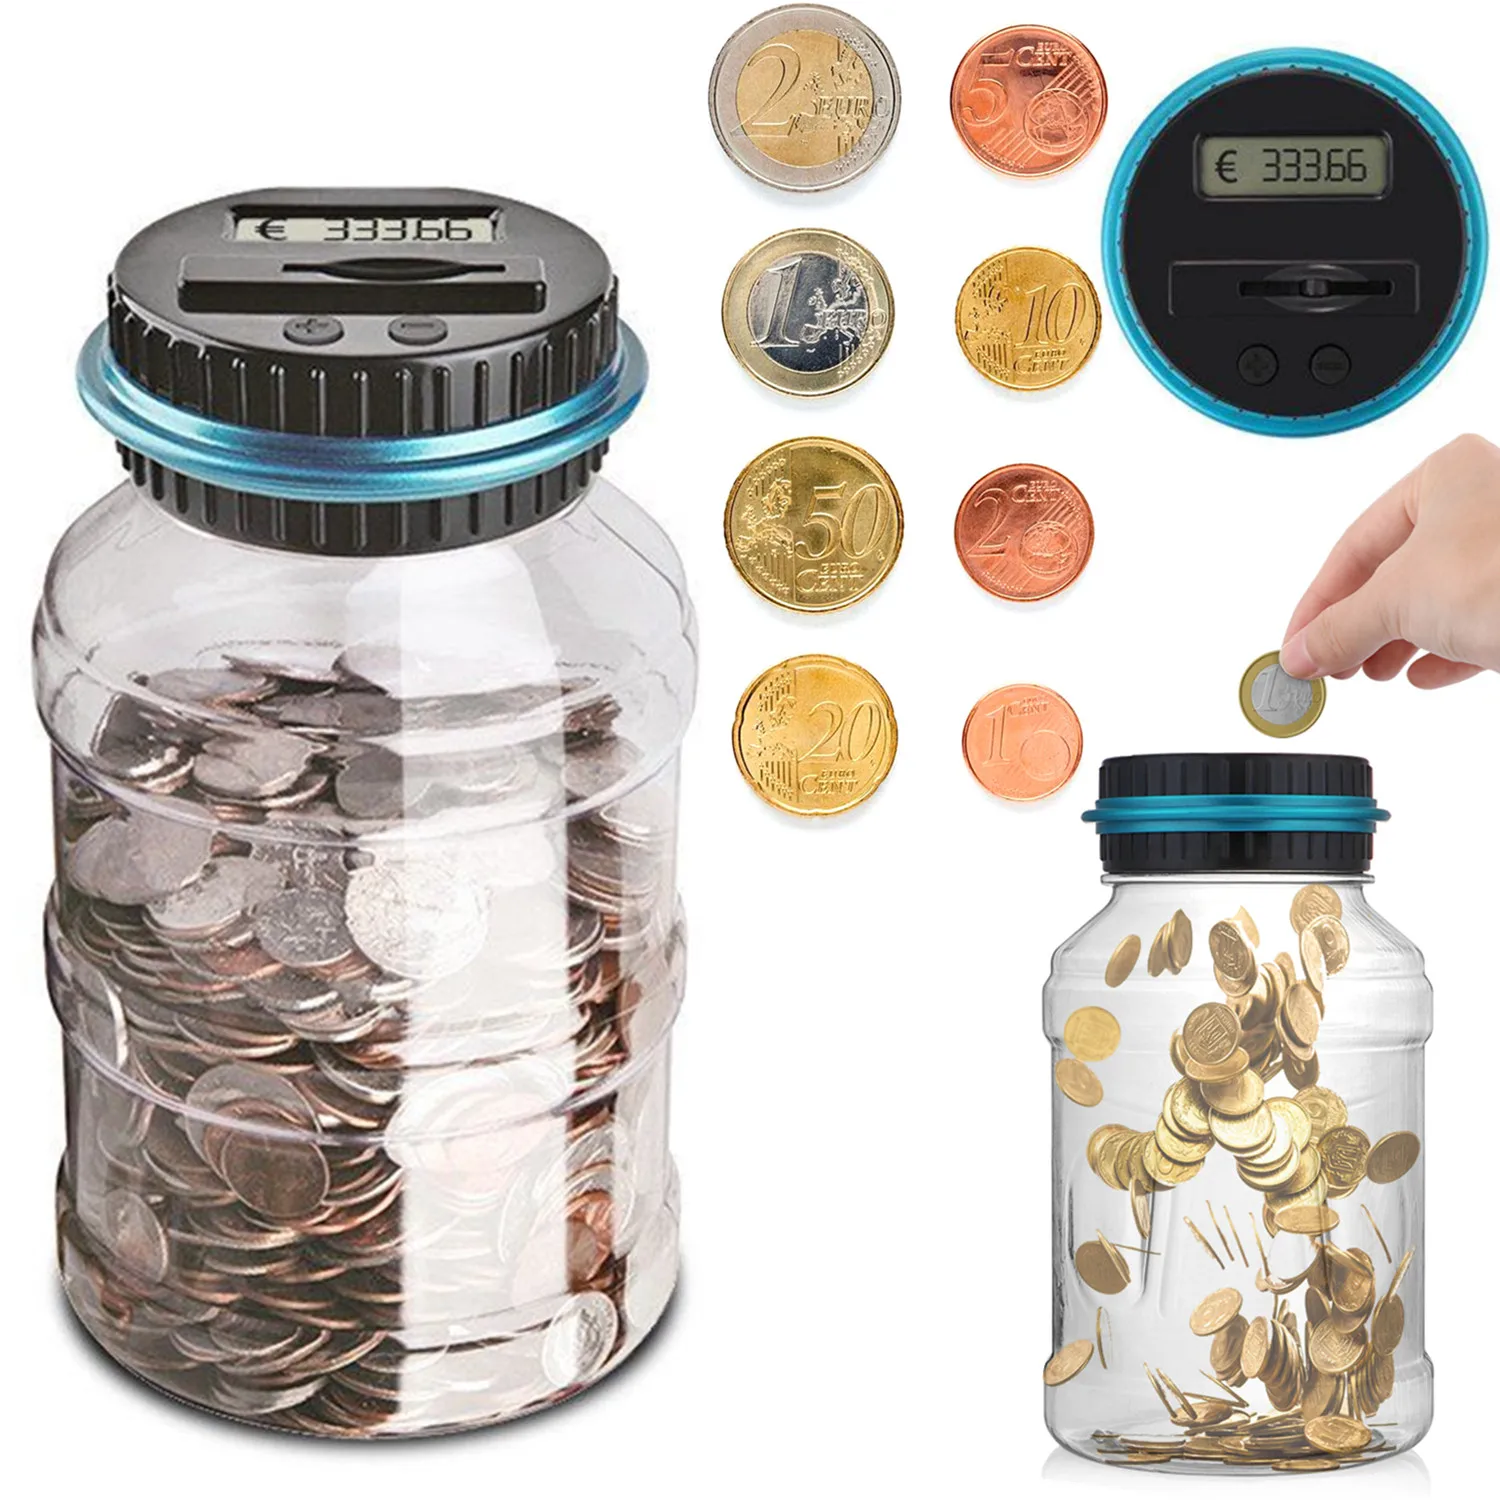 1.8L Piggy Bank Counter Coin Electronic Digital LCD Counting Coin Money Saving Box Whit Screwdriver Hand Tool Screw Kit